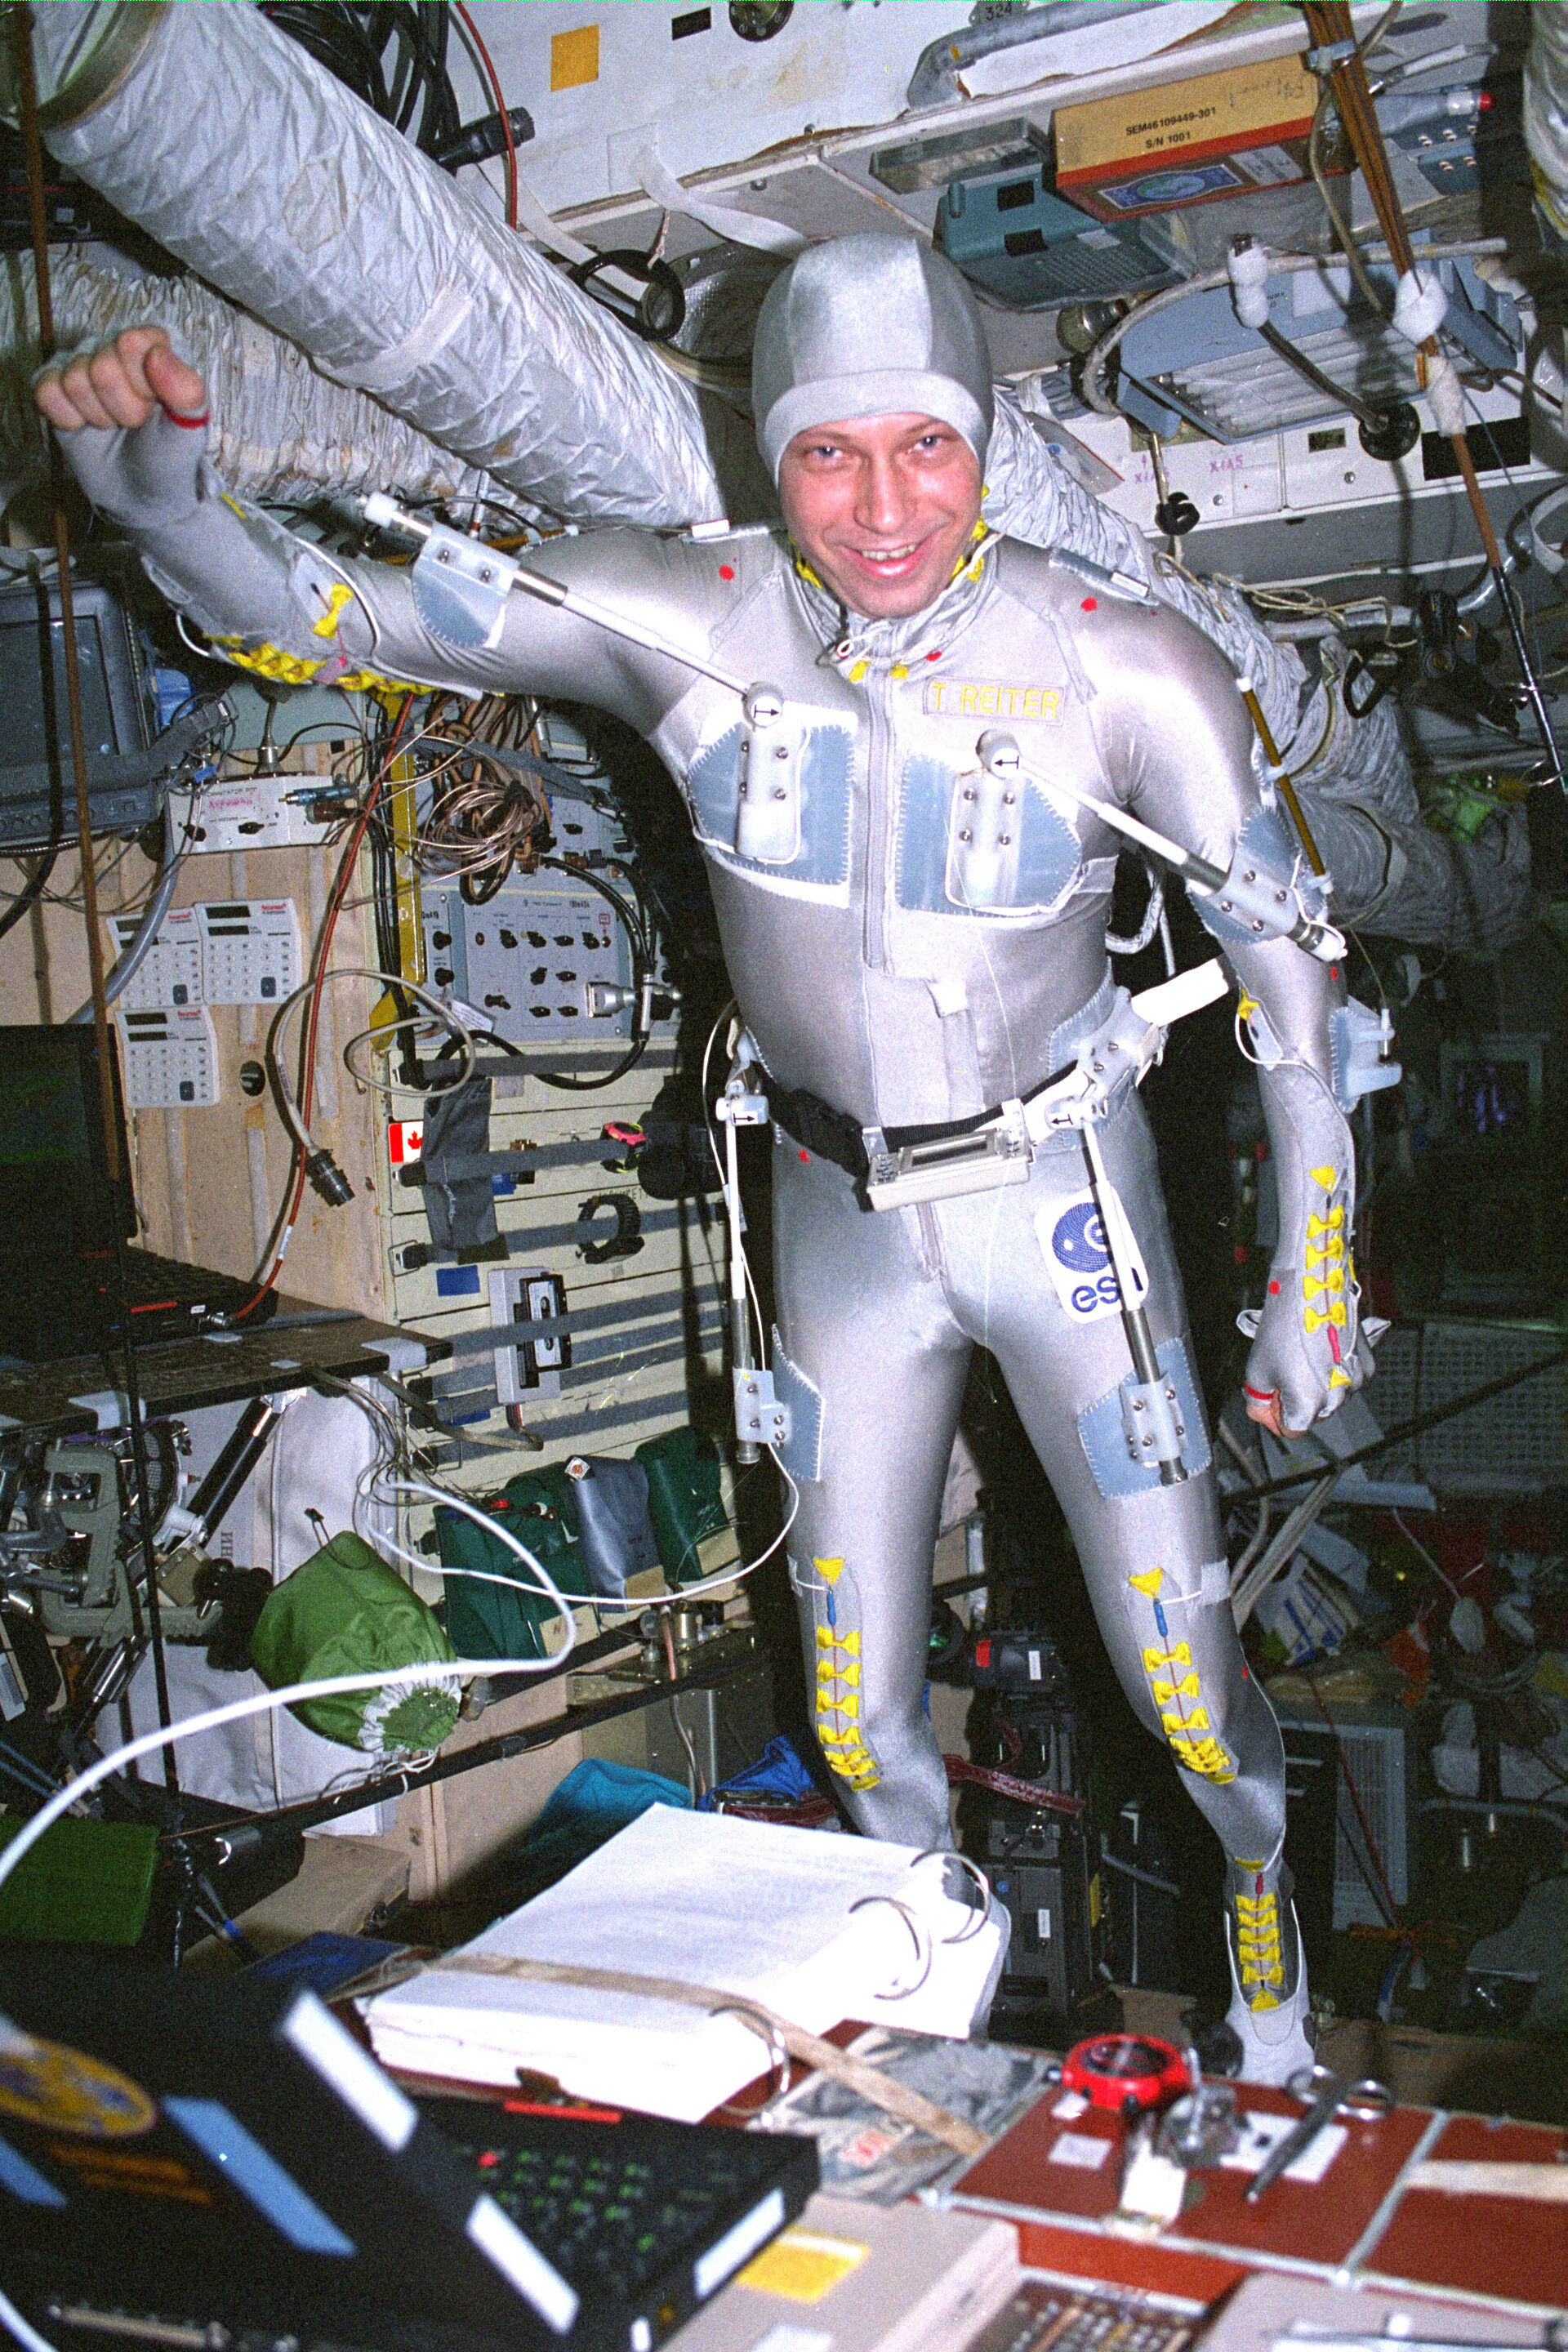 Thomas Reiter performing a biomechanical experiment during the Euromir 95 mission